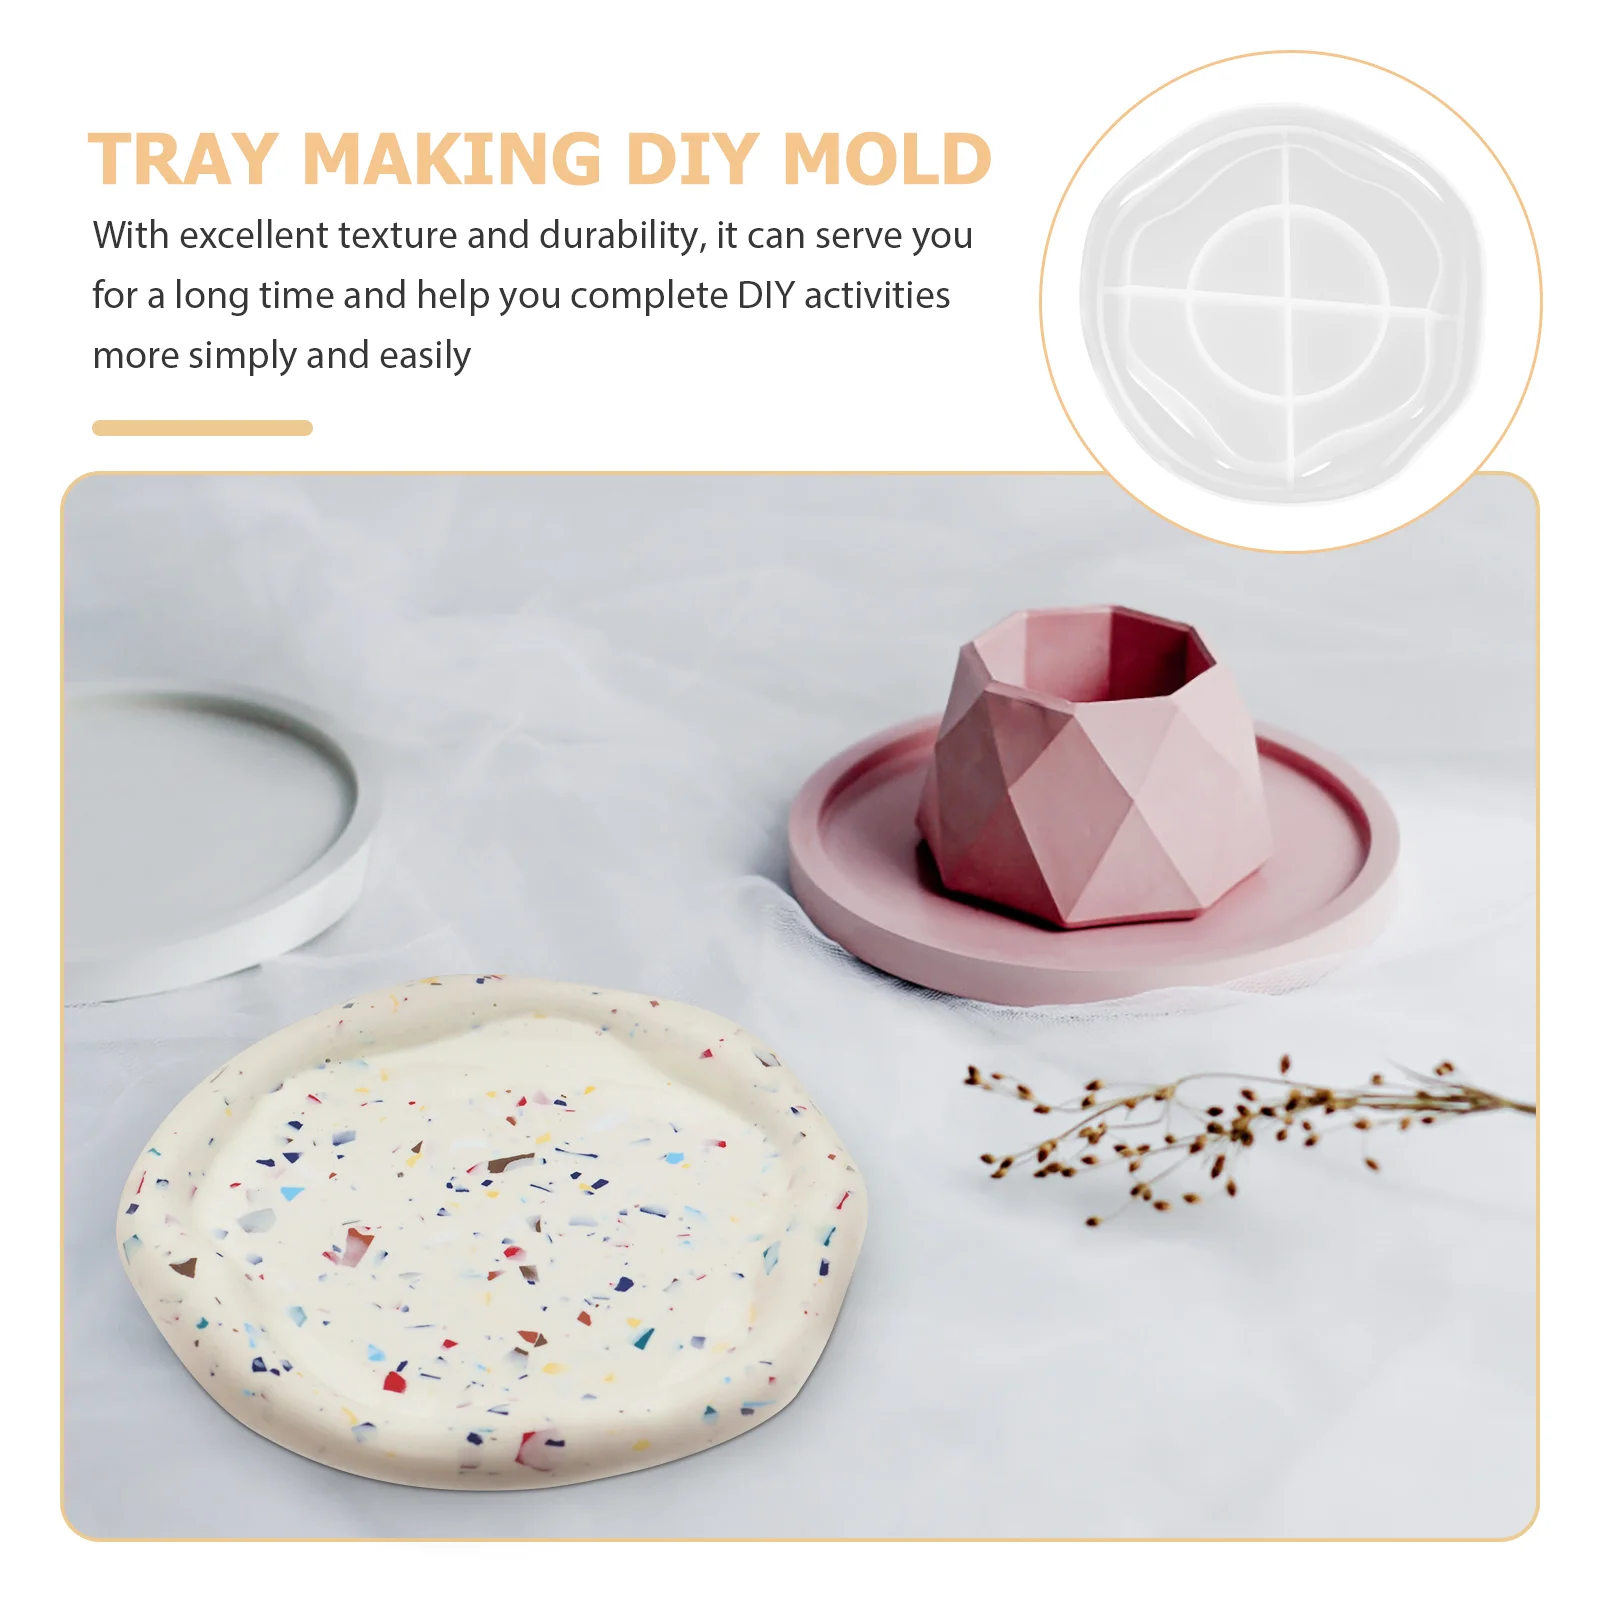 

Mold Tray Resin Diy Molds Silicone Plate Coaster Making Epoxy Jewelry Serving Casting Storage Irregular Decorative Round Rolling